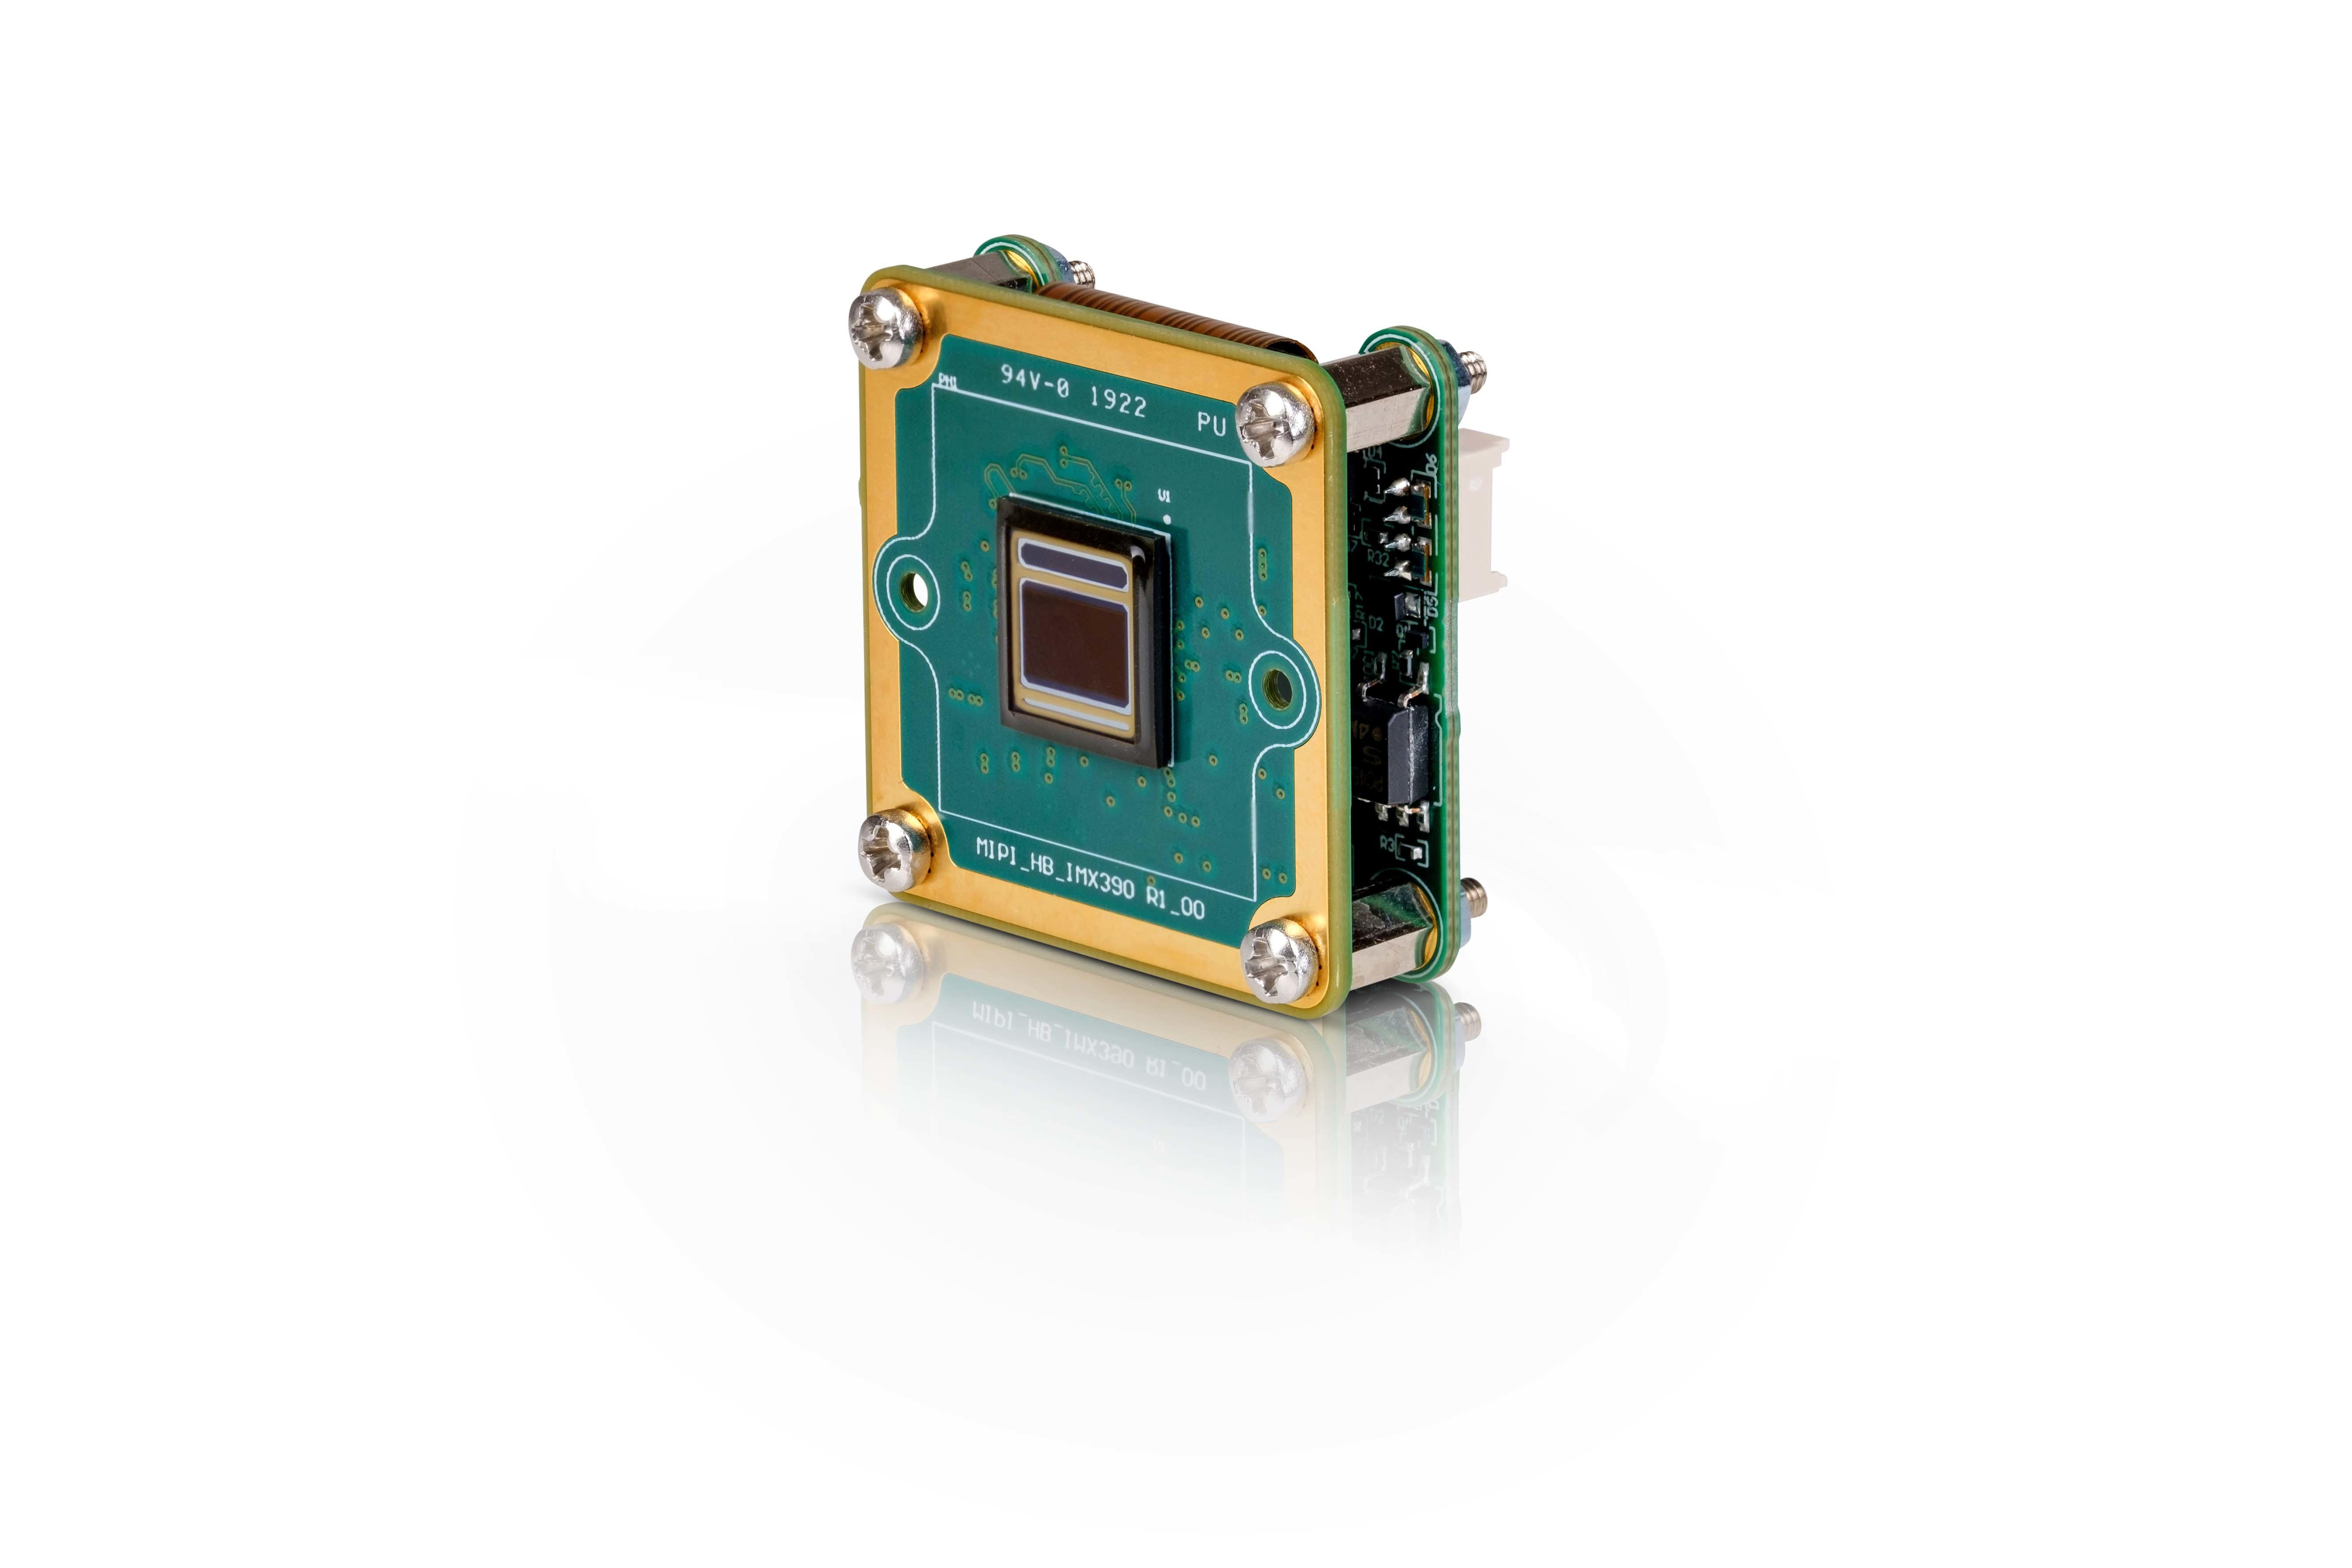 The Imaging Source, 1.6MP 1/2.9" IMX296, Embedded Board Camera